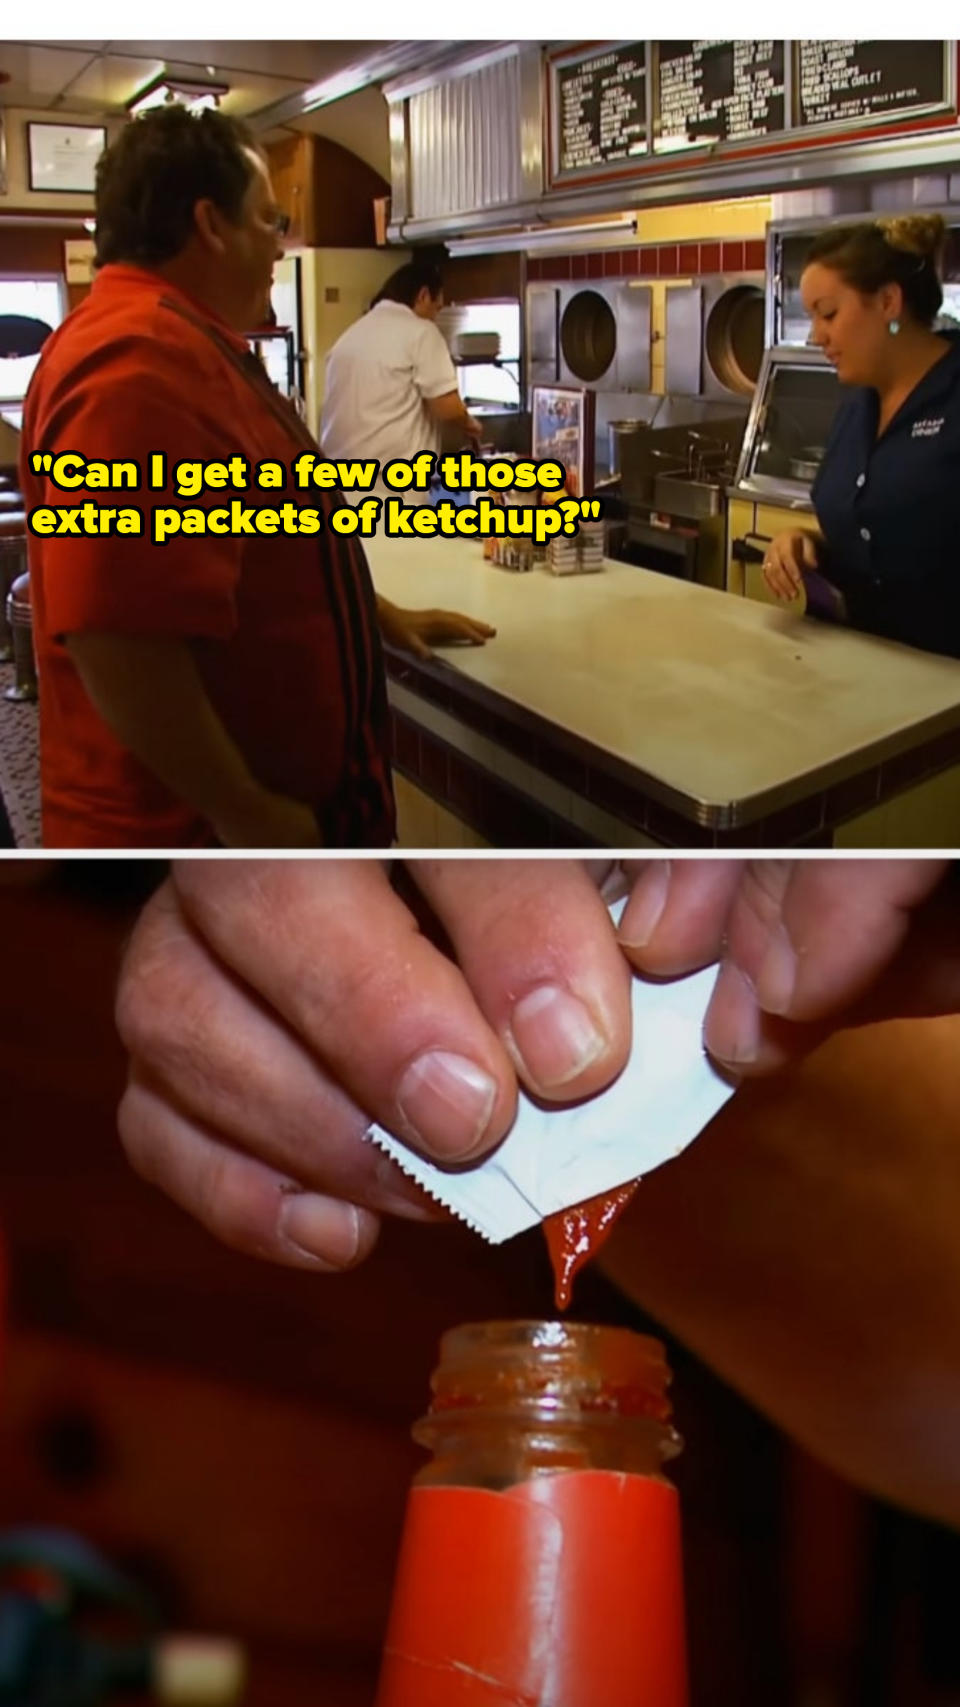 A person interacts with staff in a diner; close-up of a hand opening a condiment packet